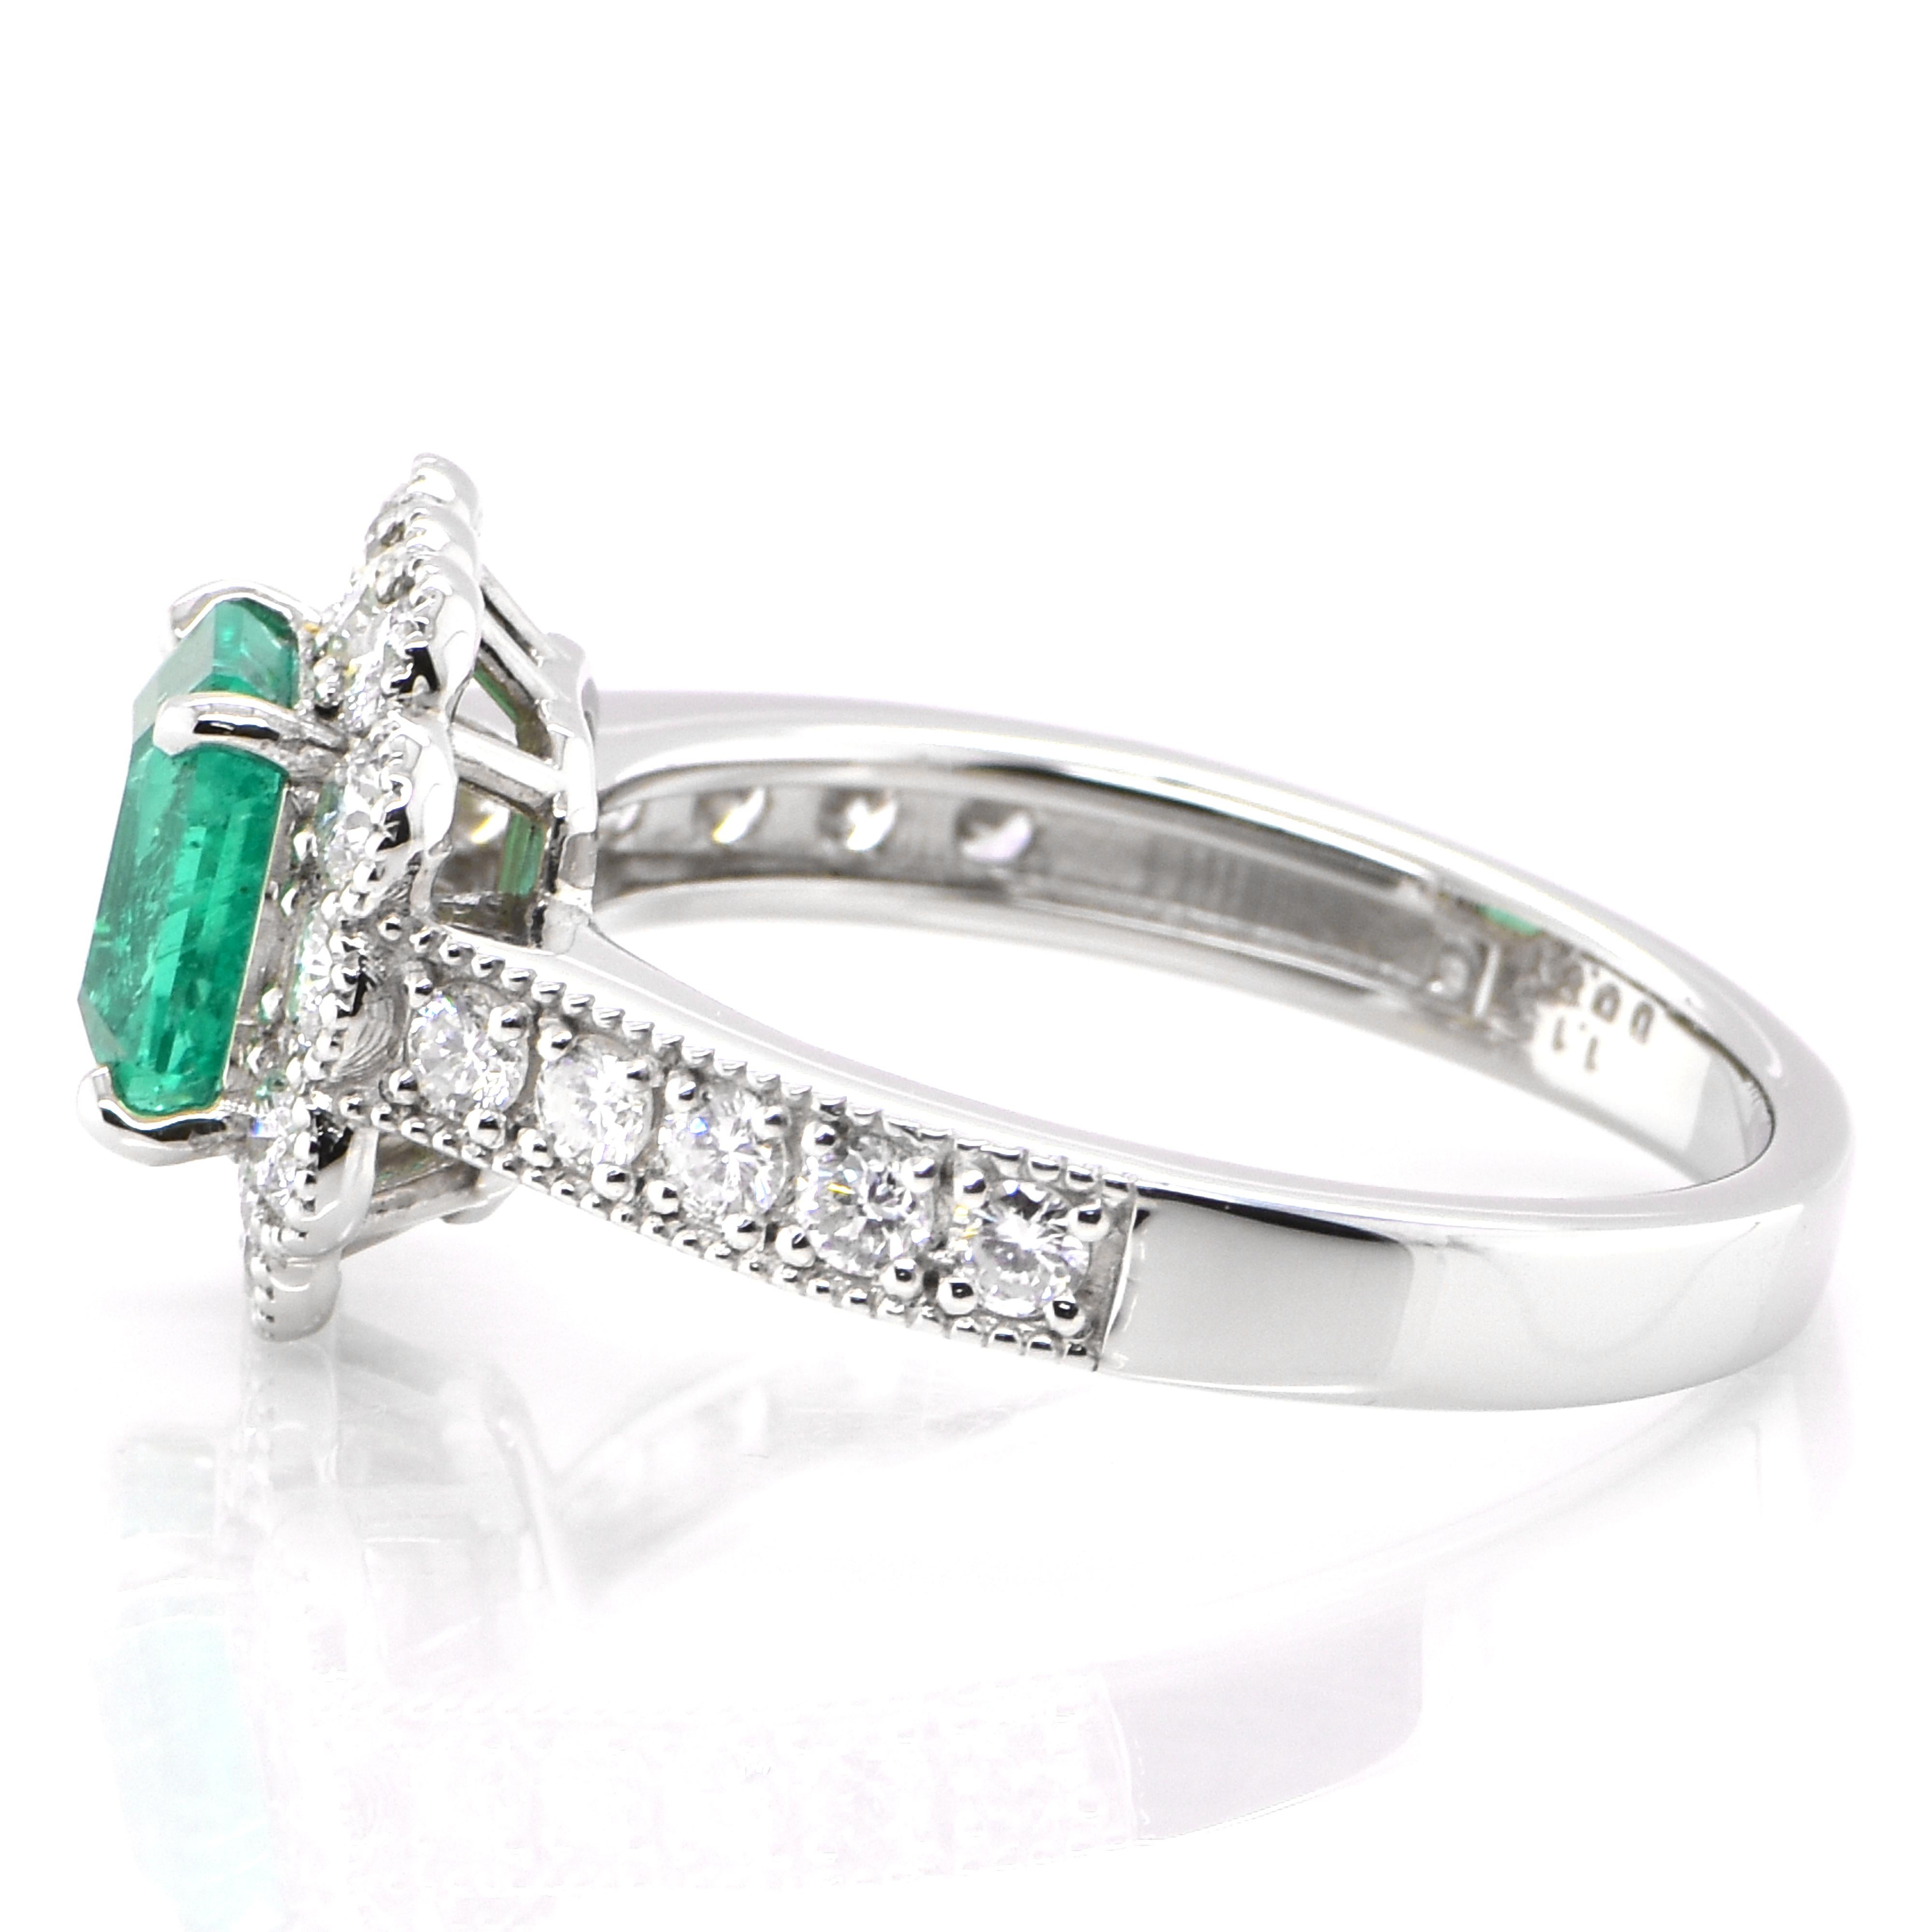 Emerald Cut 1.15 Carat Natural Colombian Emerald and Diamond Ring Set in Platinum For Sale